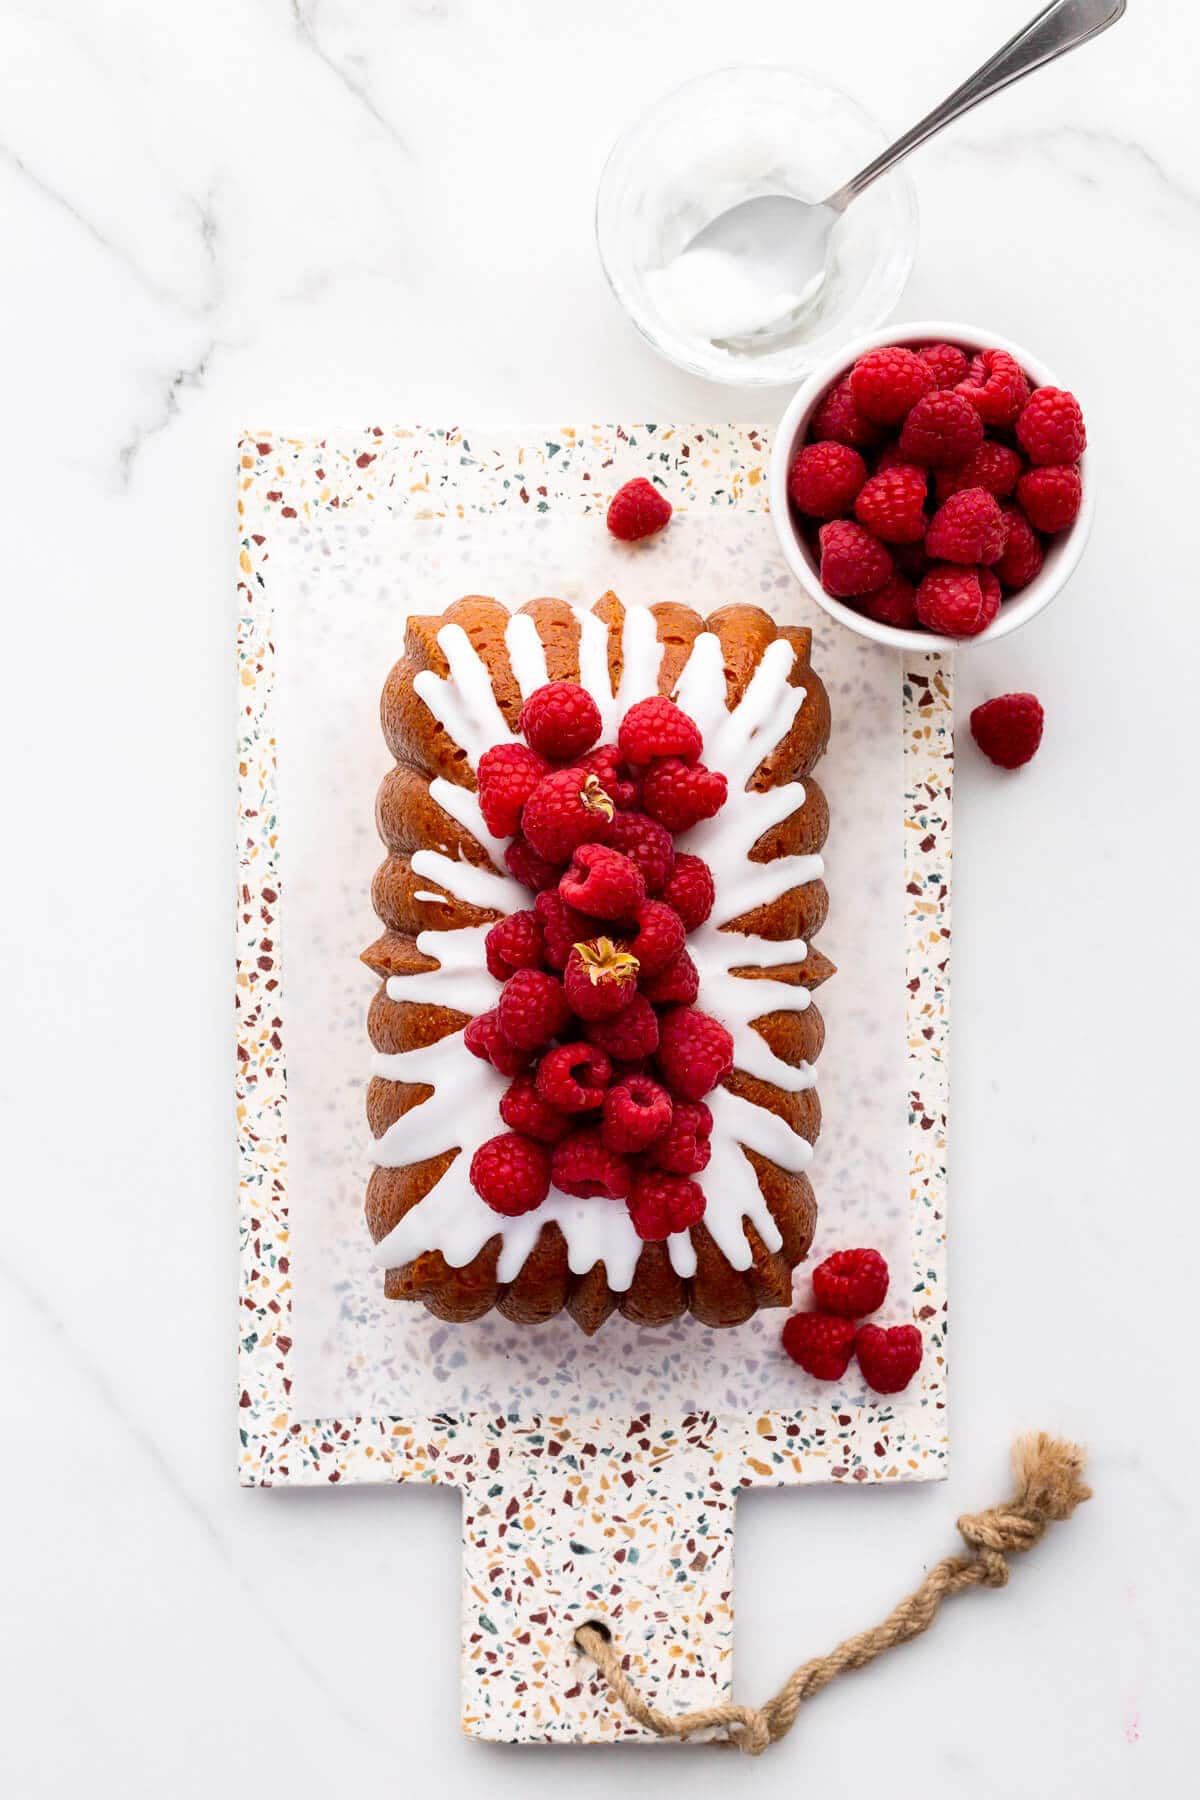 Lemon drizzle cake topped with icing and fresh raspberries.